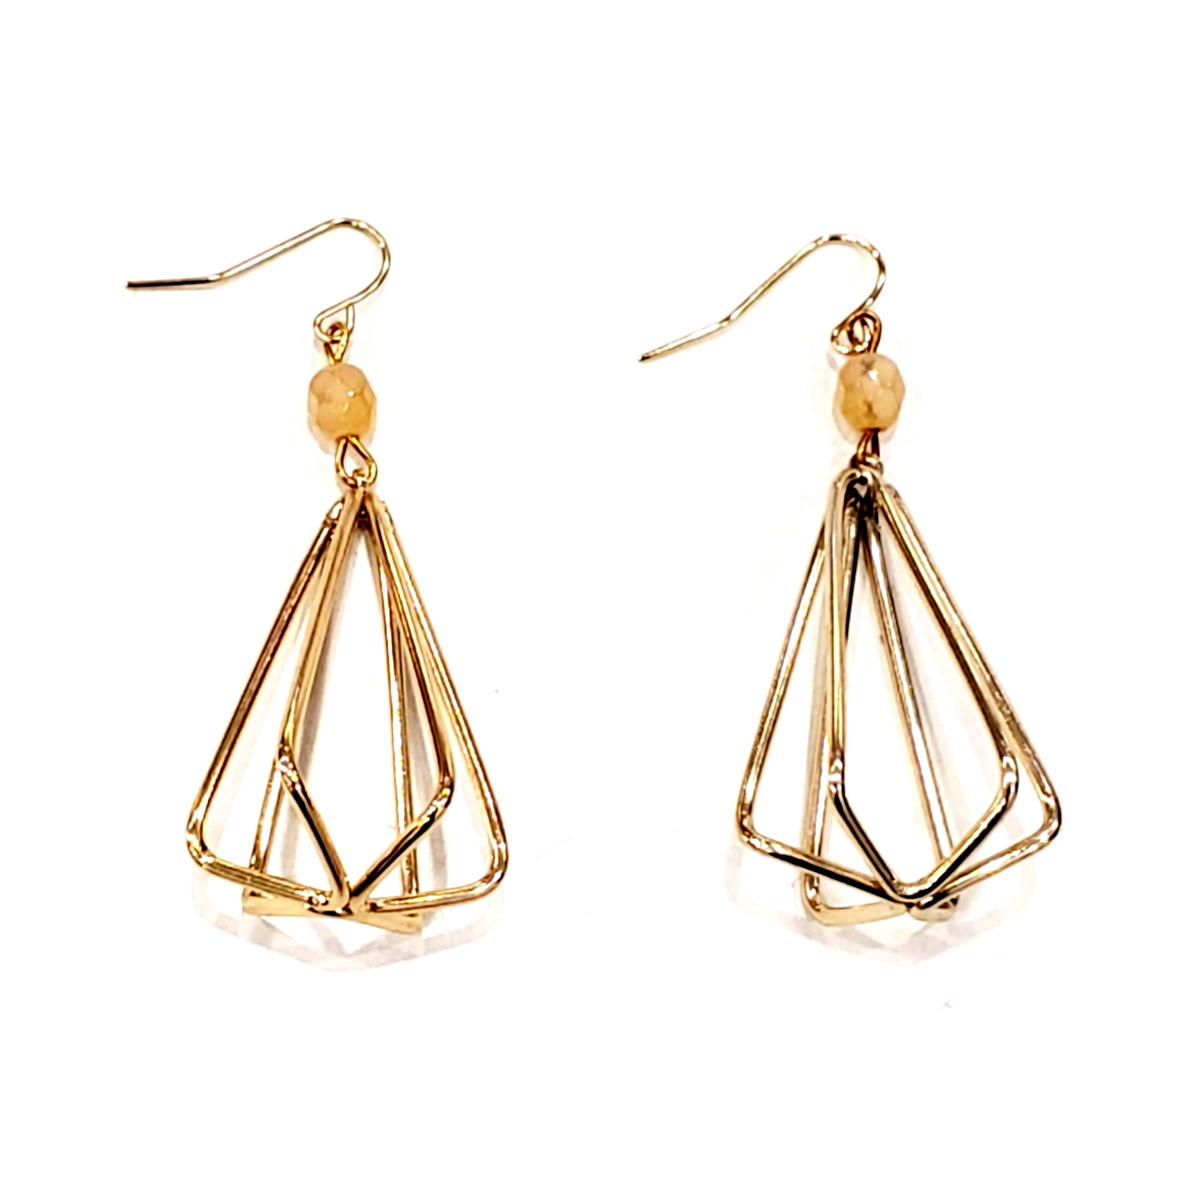 Whisk Cage Earrings